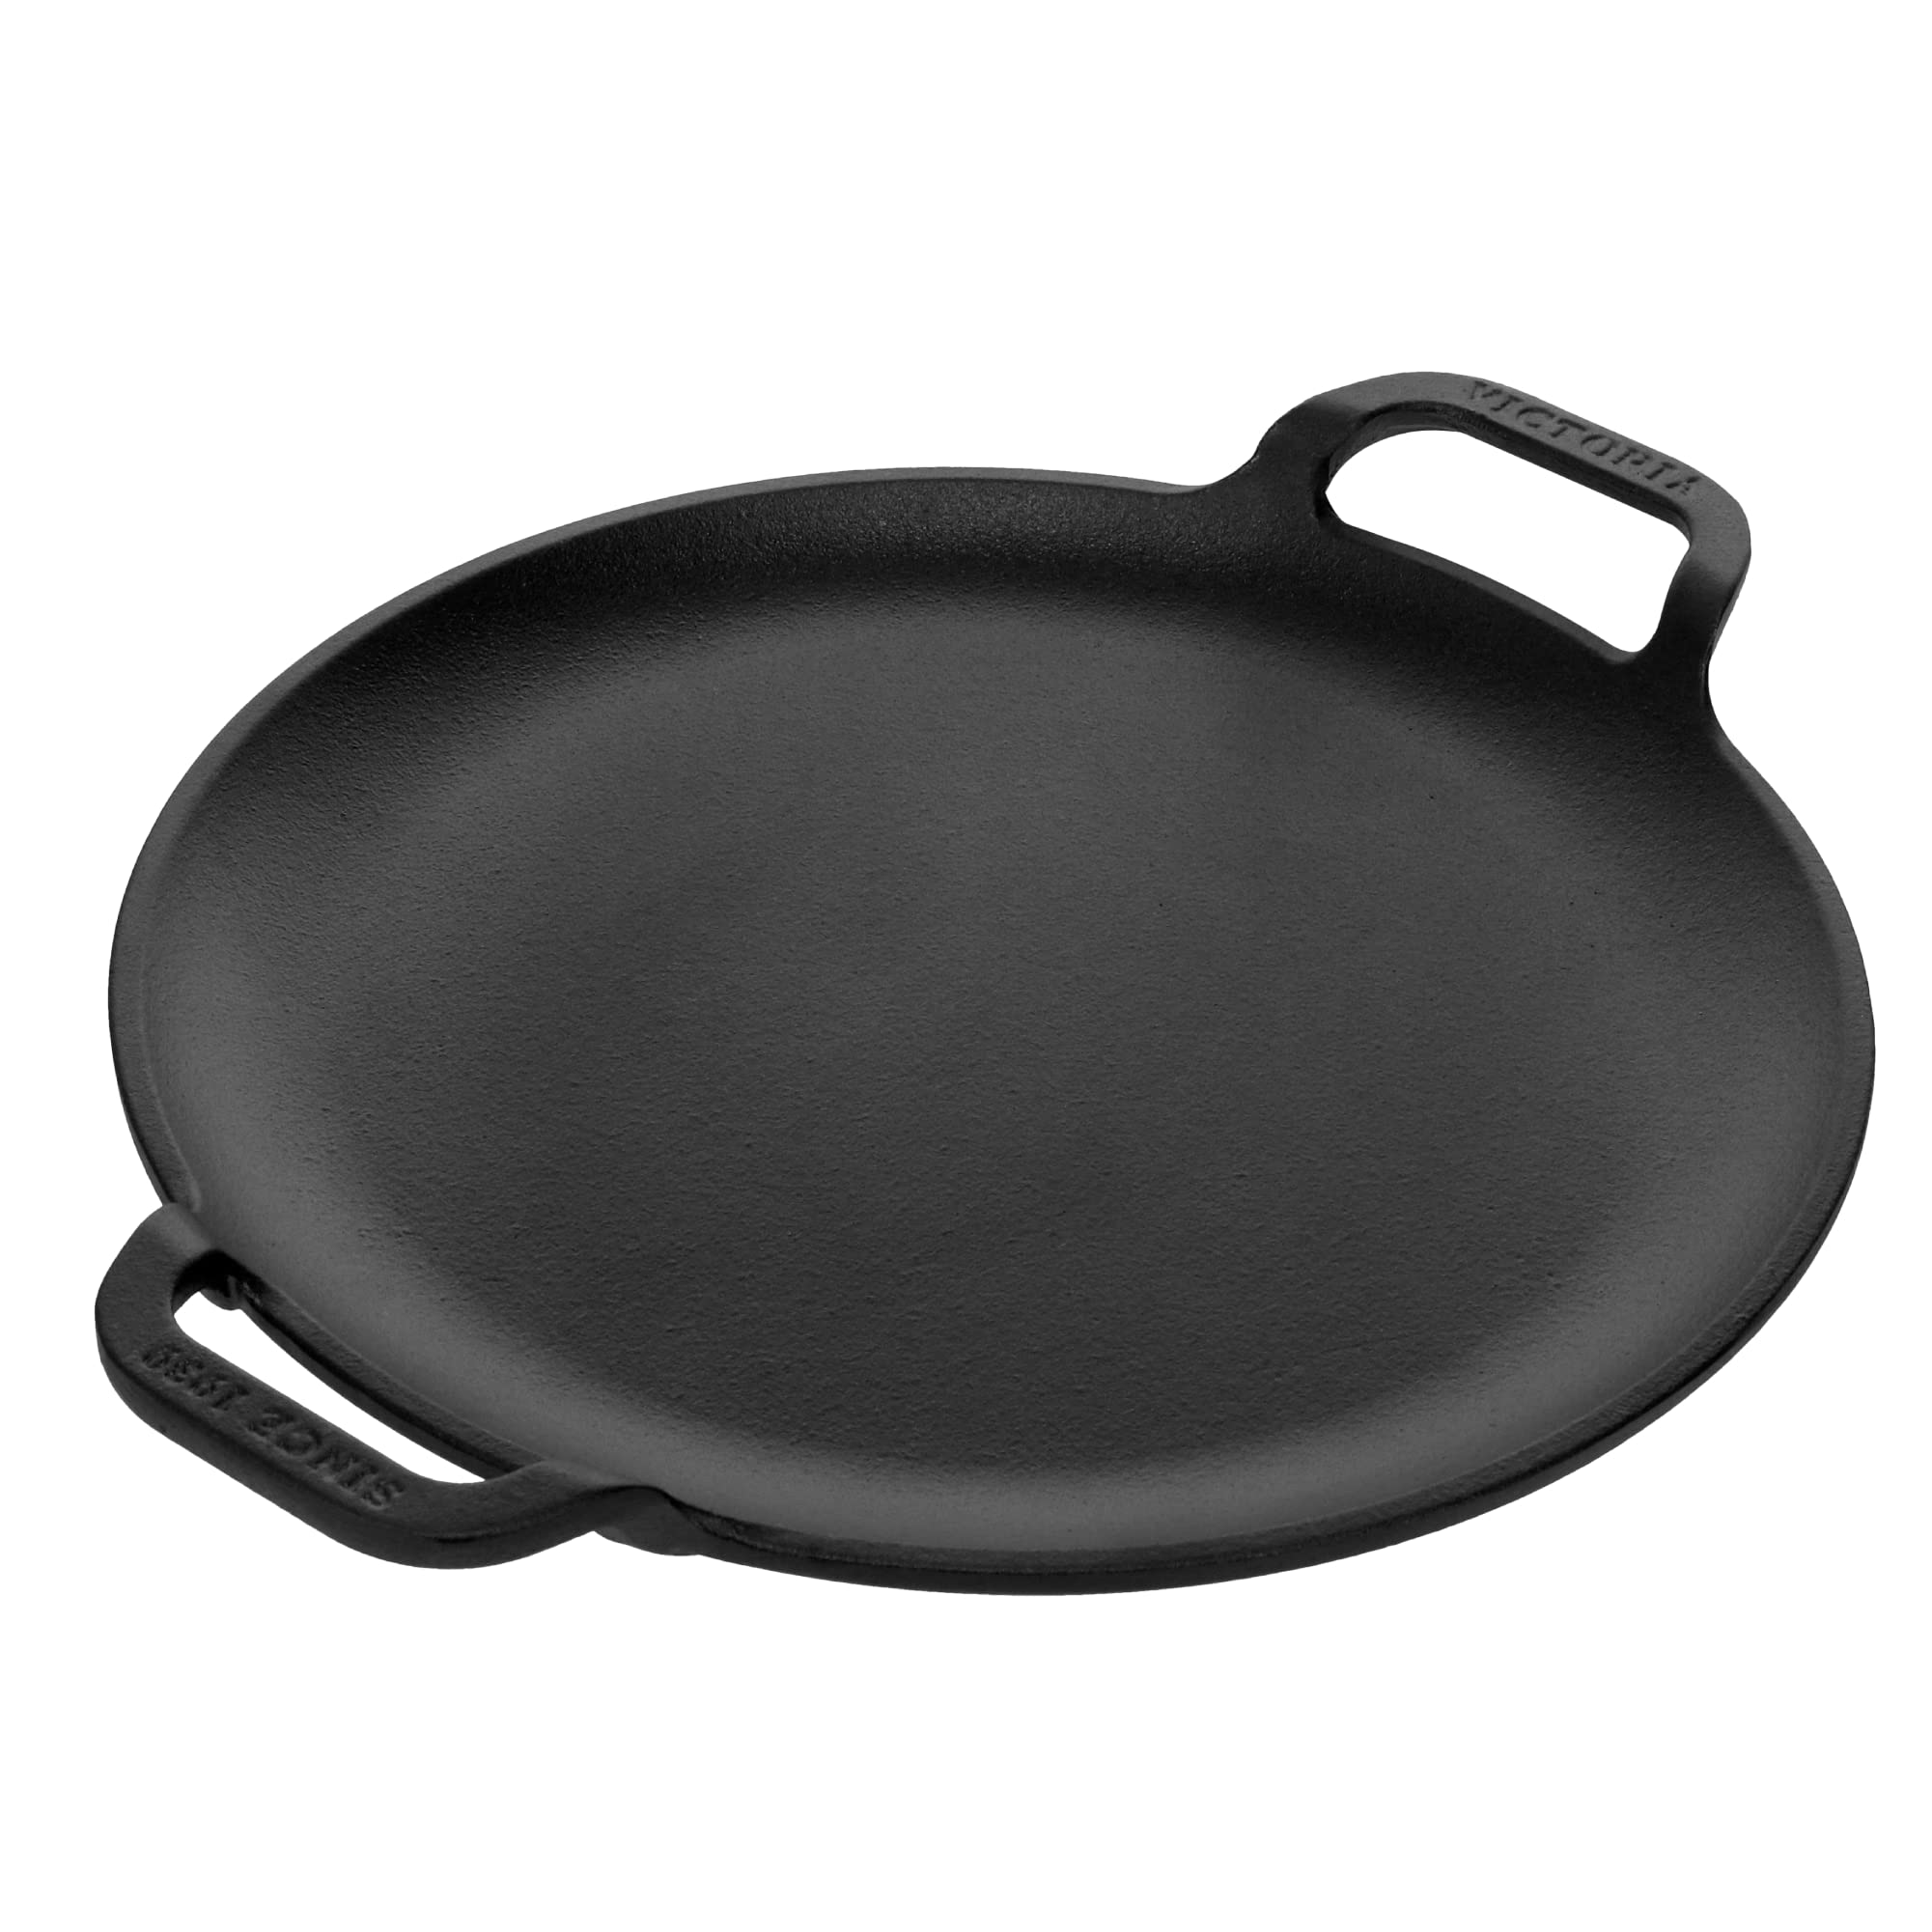 Victoria 10-Inch Cast-Iron Comal Pizza Pan with 2 Side Handles, Preseasoned with Flaxseed Oil, Made in Colombia